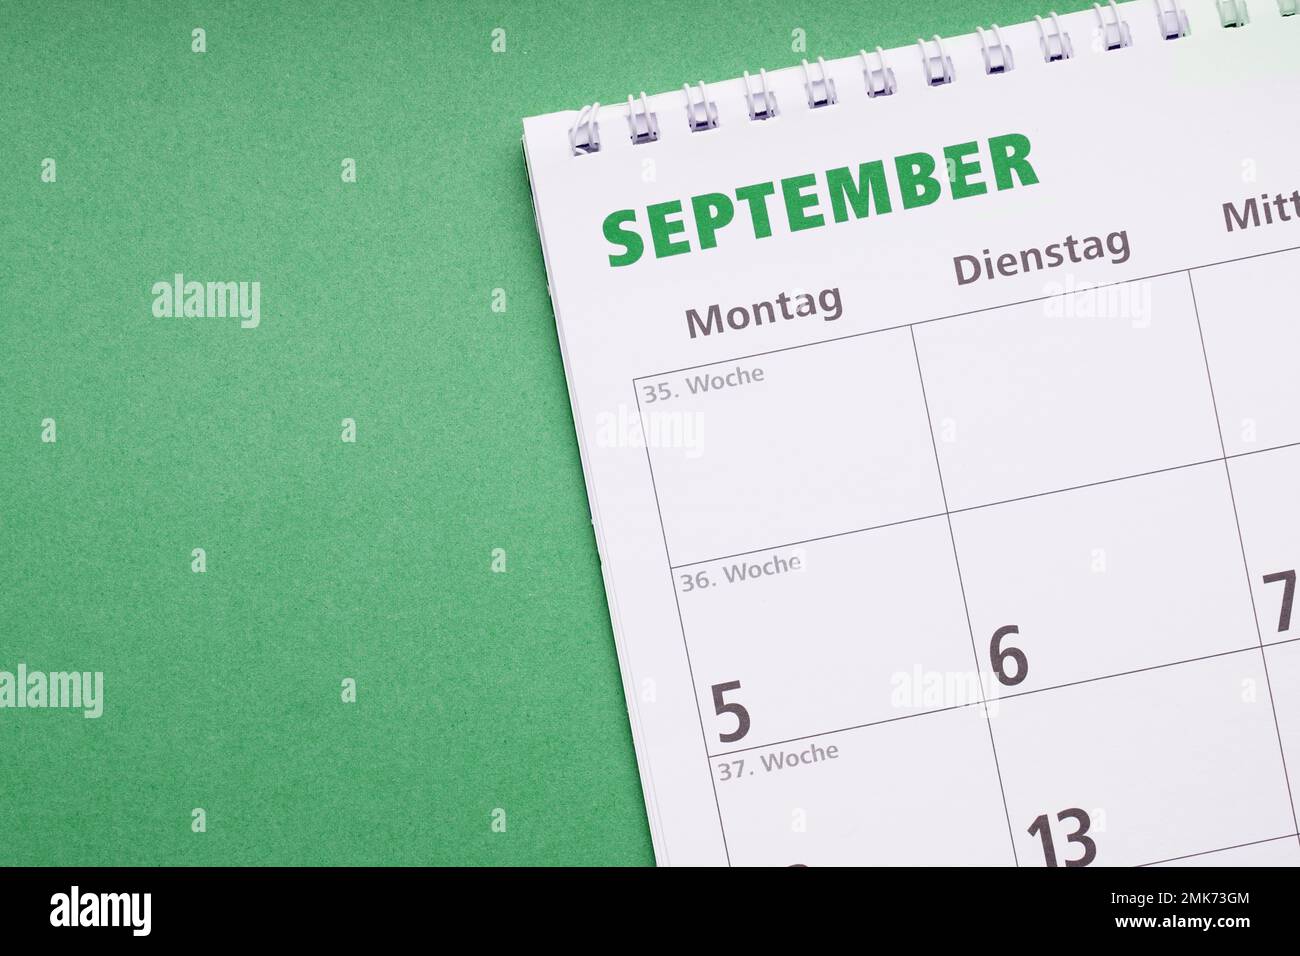 german calendar or planner for the month of september on green paper background with copyspace Stock Photo